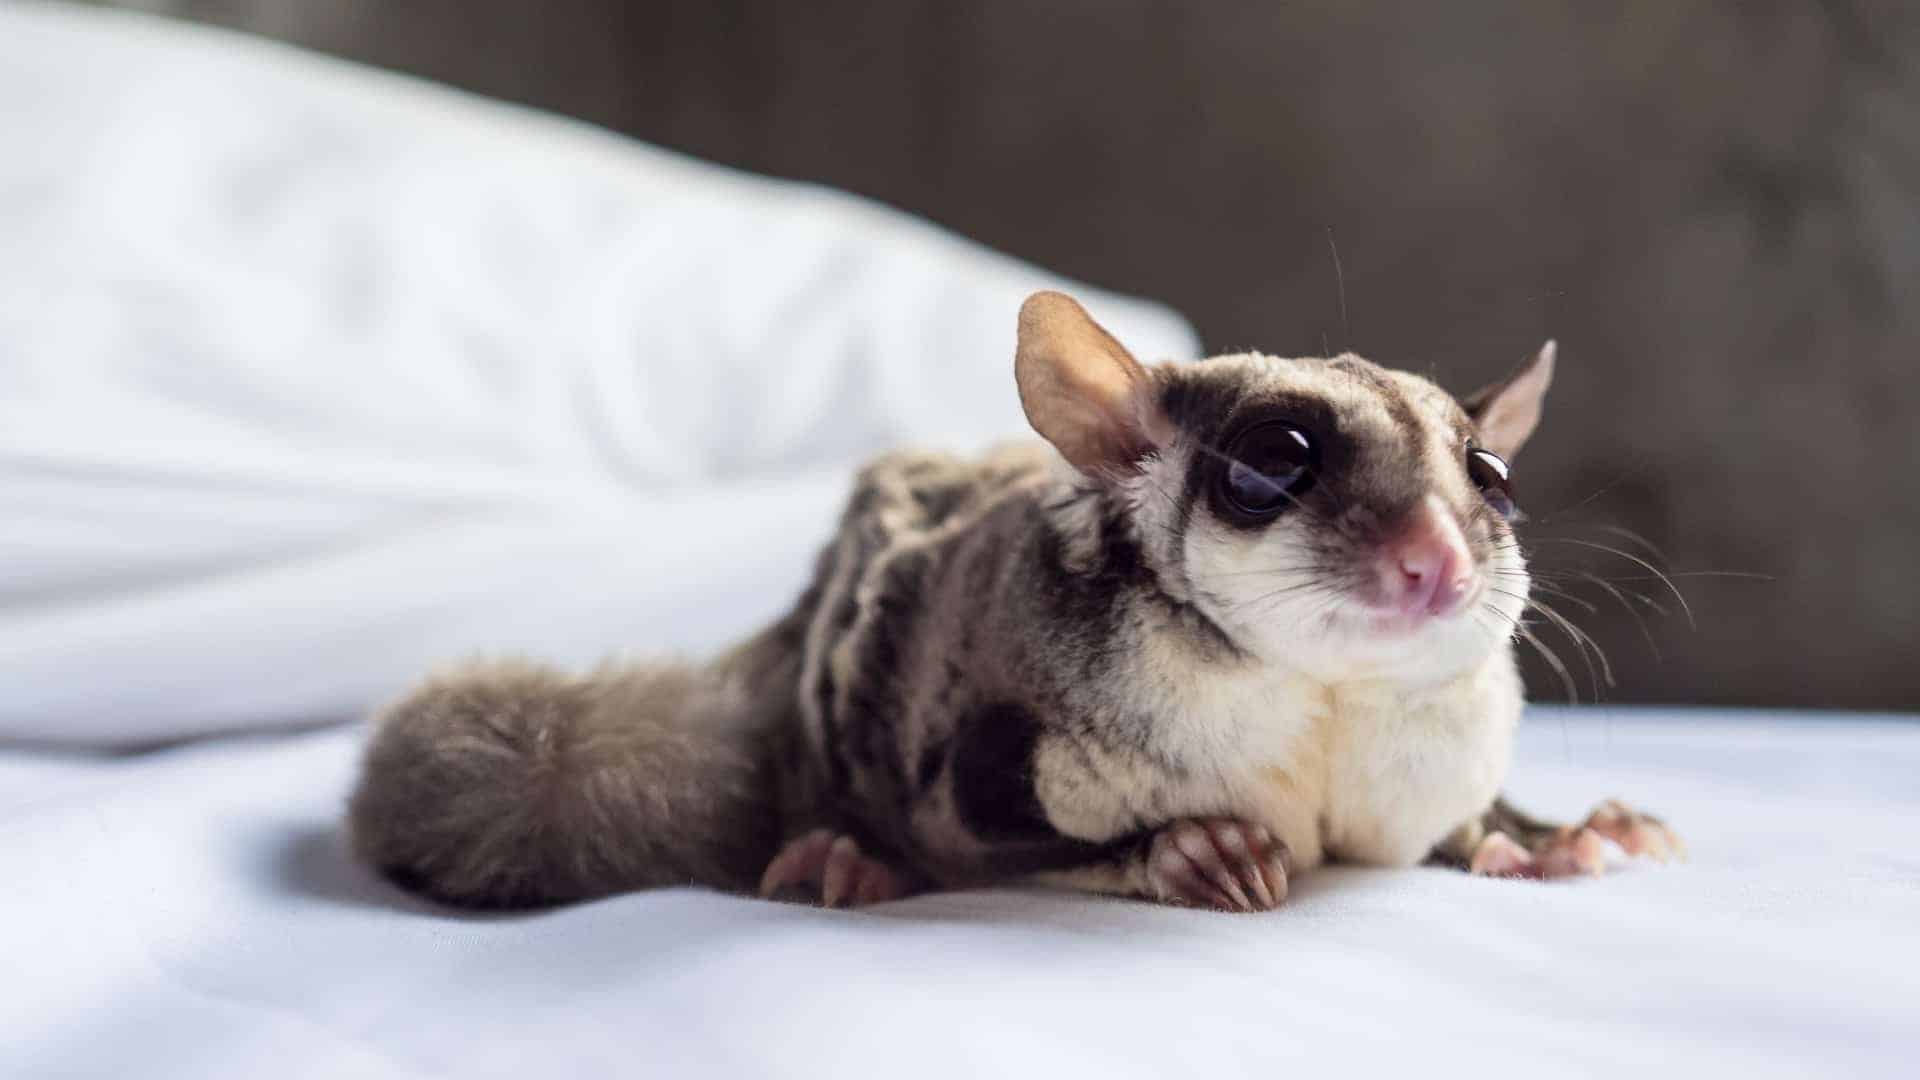 Looking for some super cute sugar glider gifts for your friend? How about for your own sweet little glider? Either way, we've got you covered. Check it out!